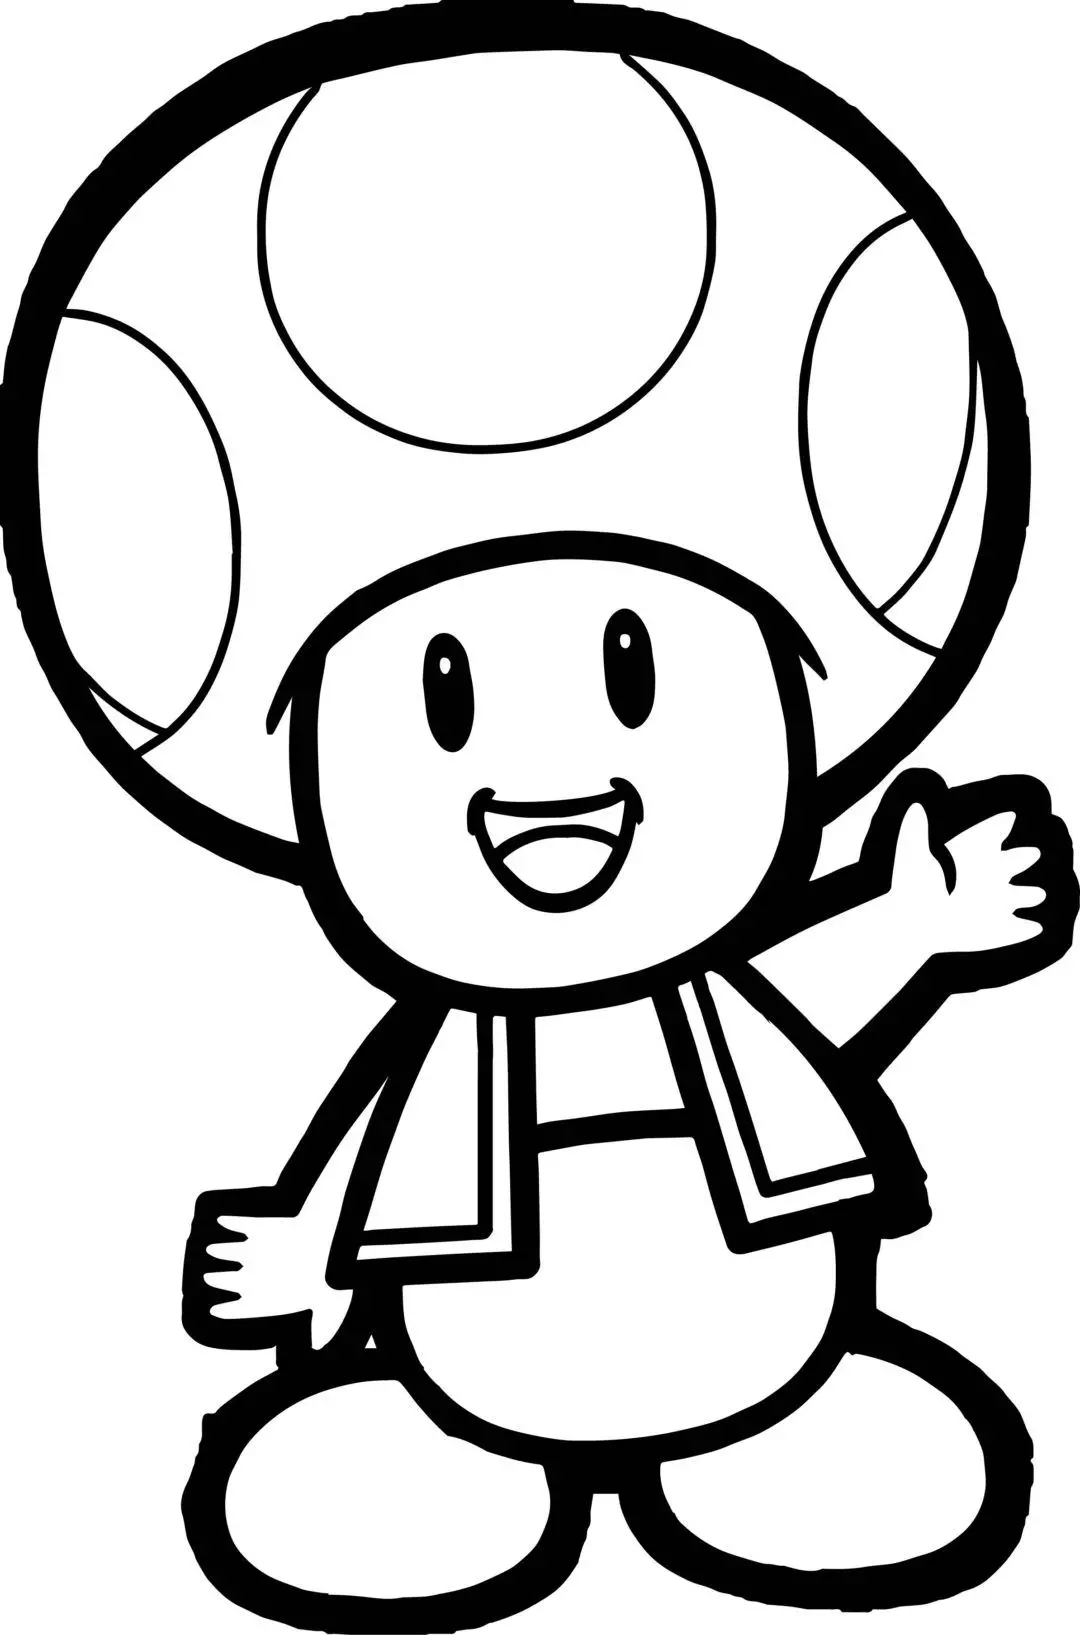 Fun and easy toad coloring pages for kids